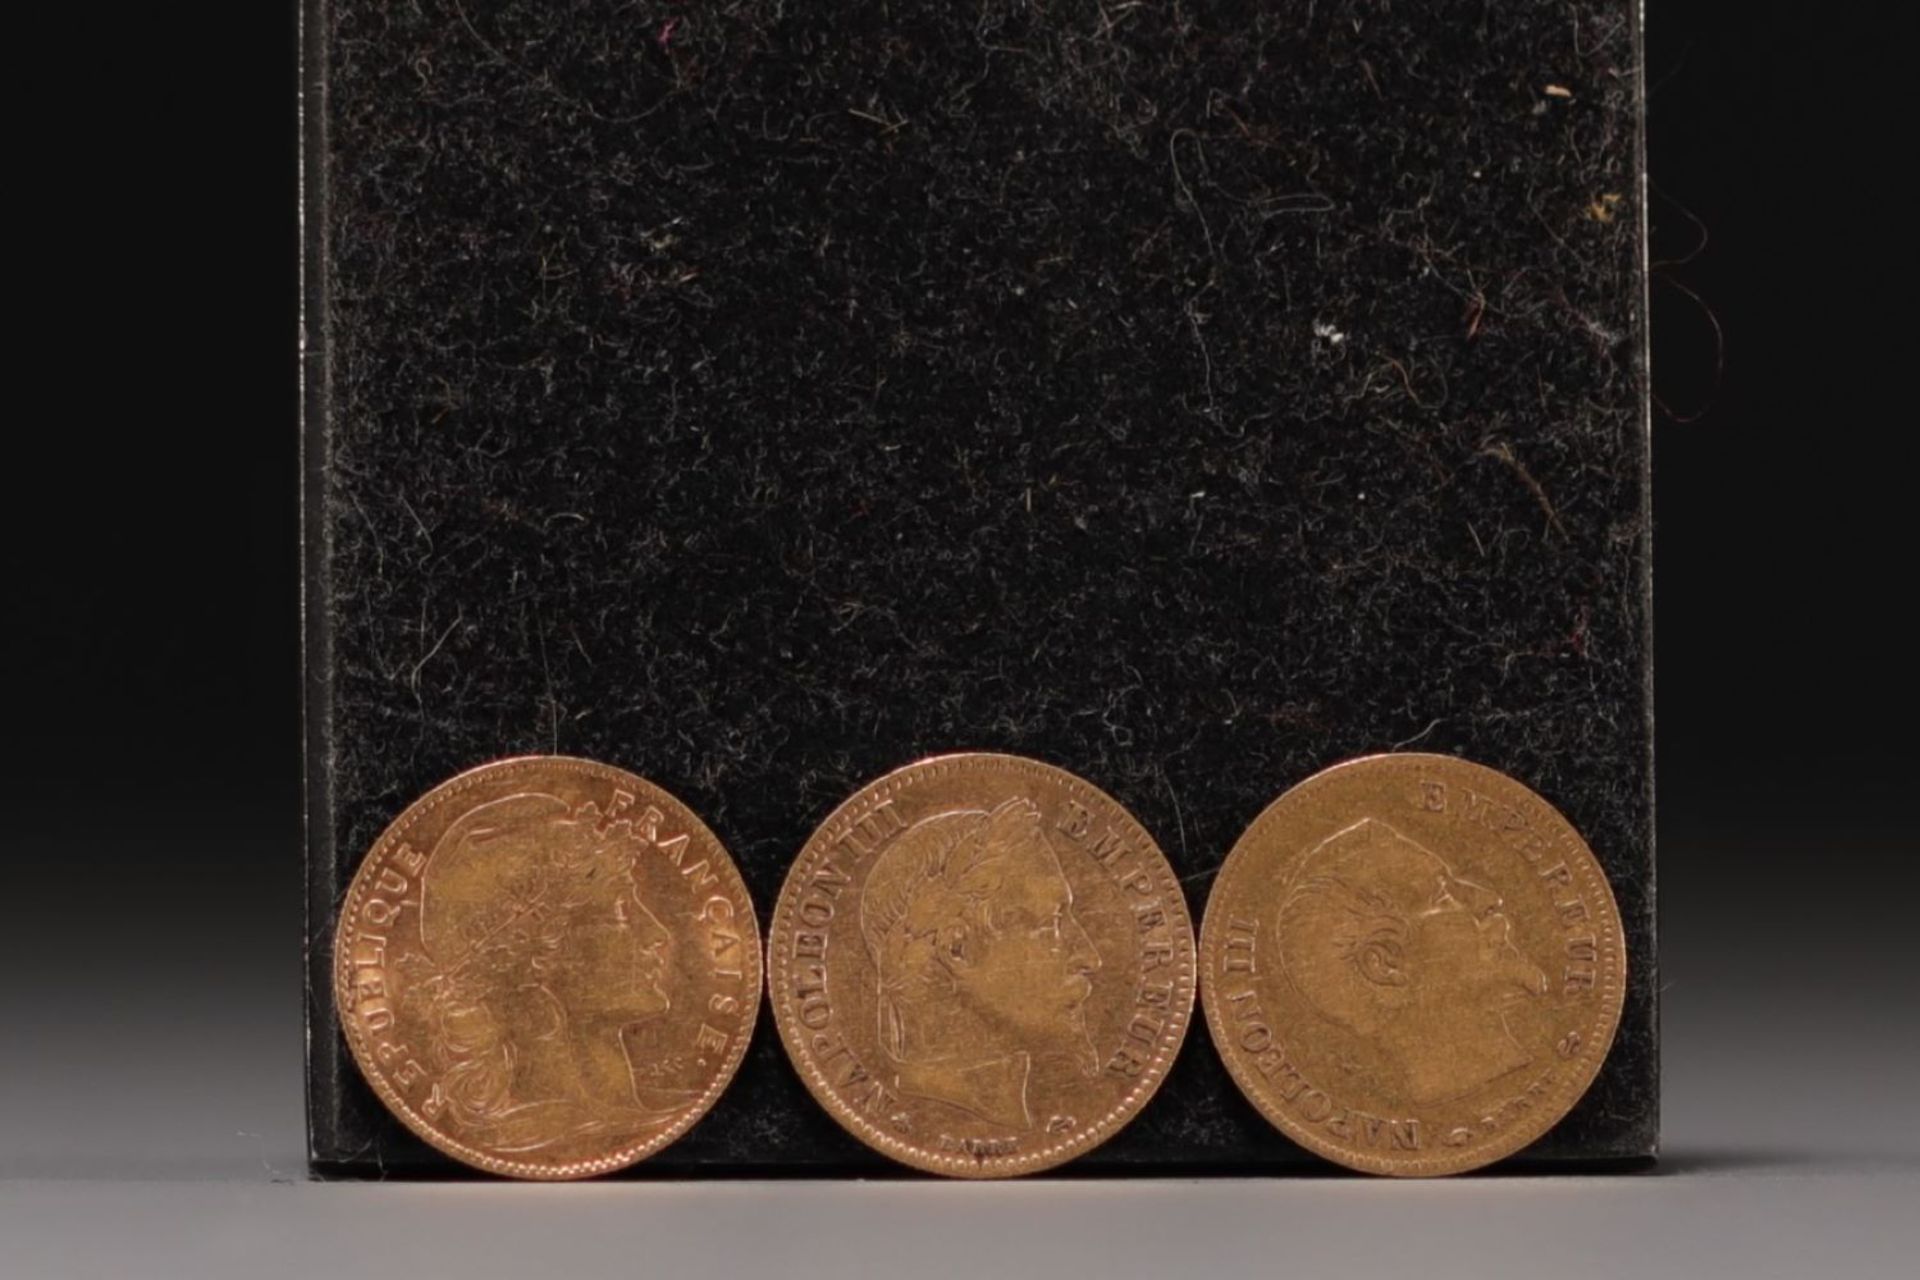 Set of three 10 Frs Gold coins, a Marianne from 1907 and two 10 Frs Napoleon III from 1826 and 1863.